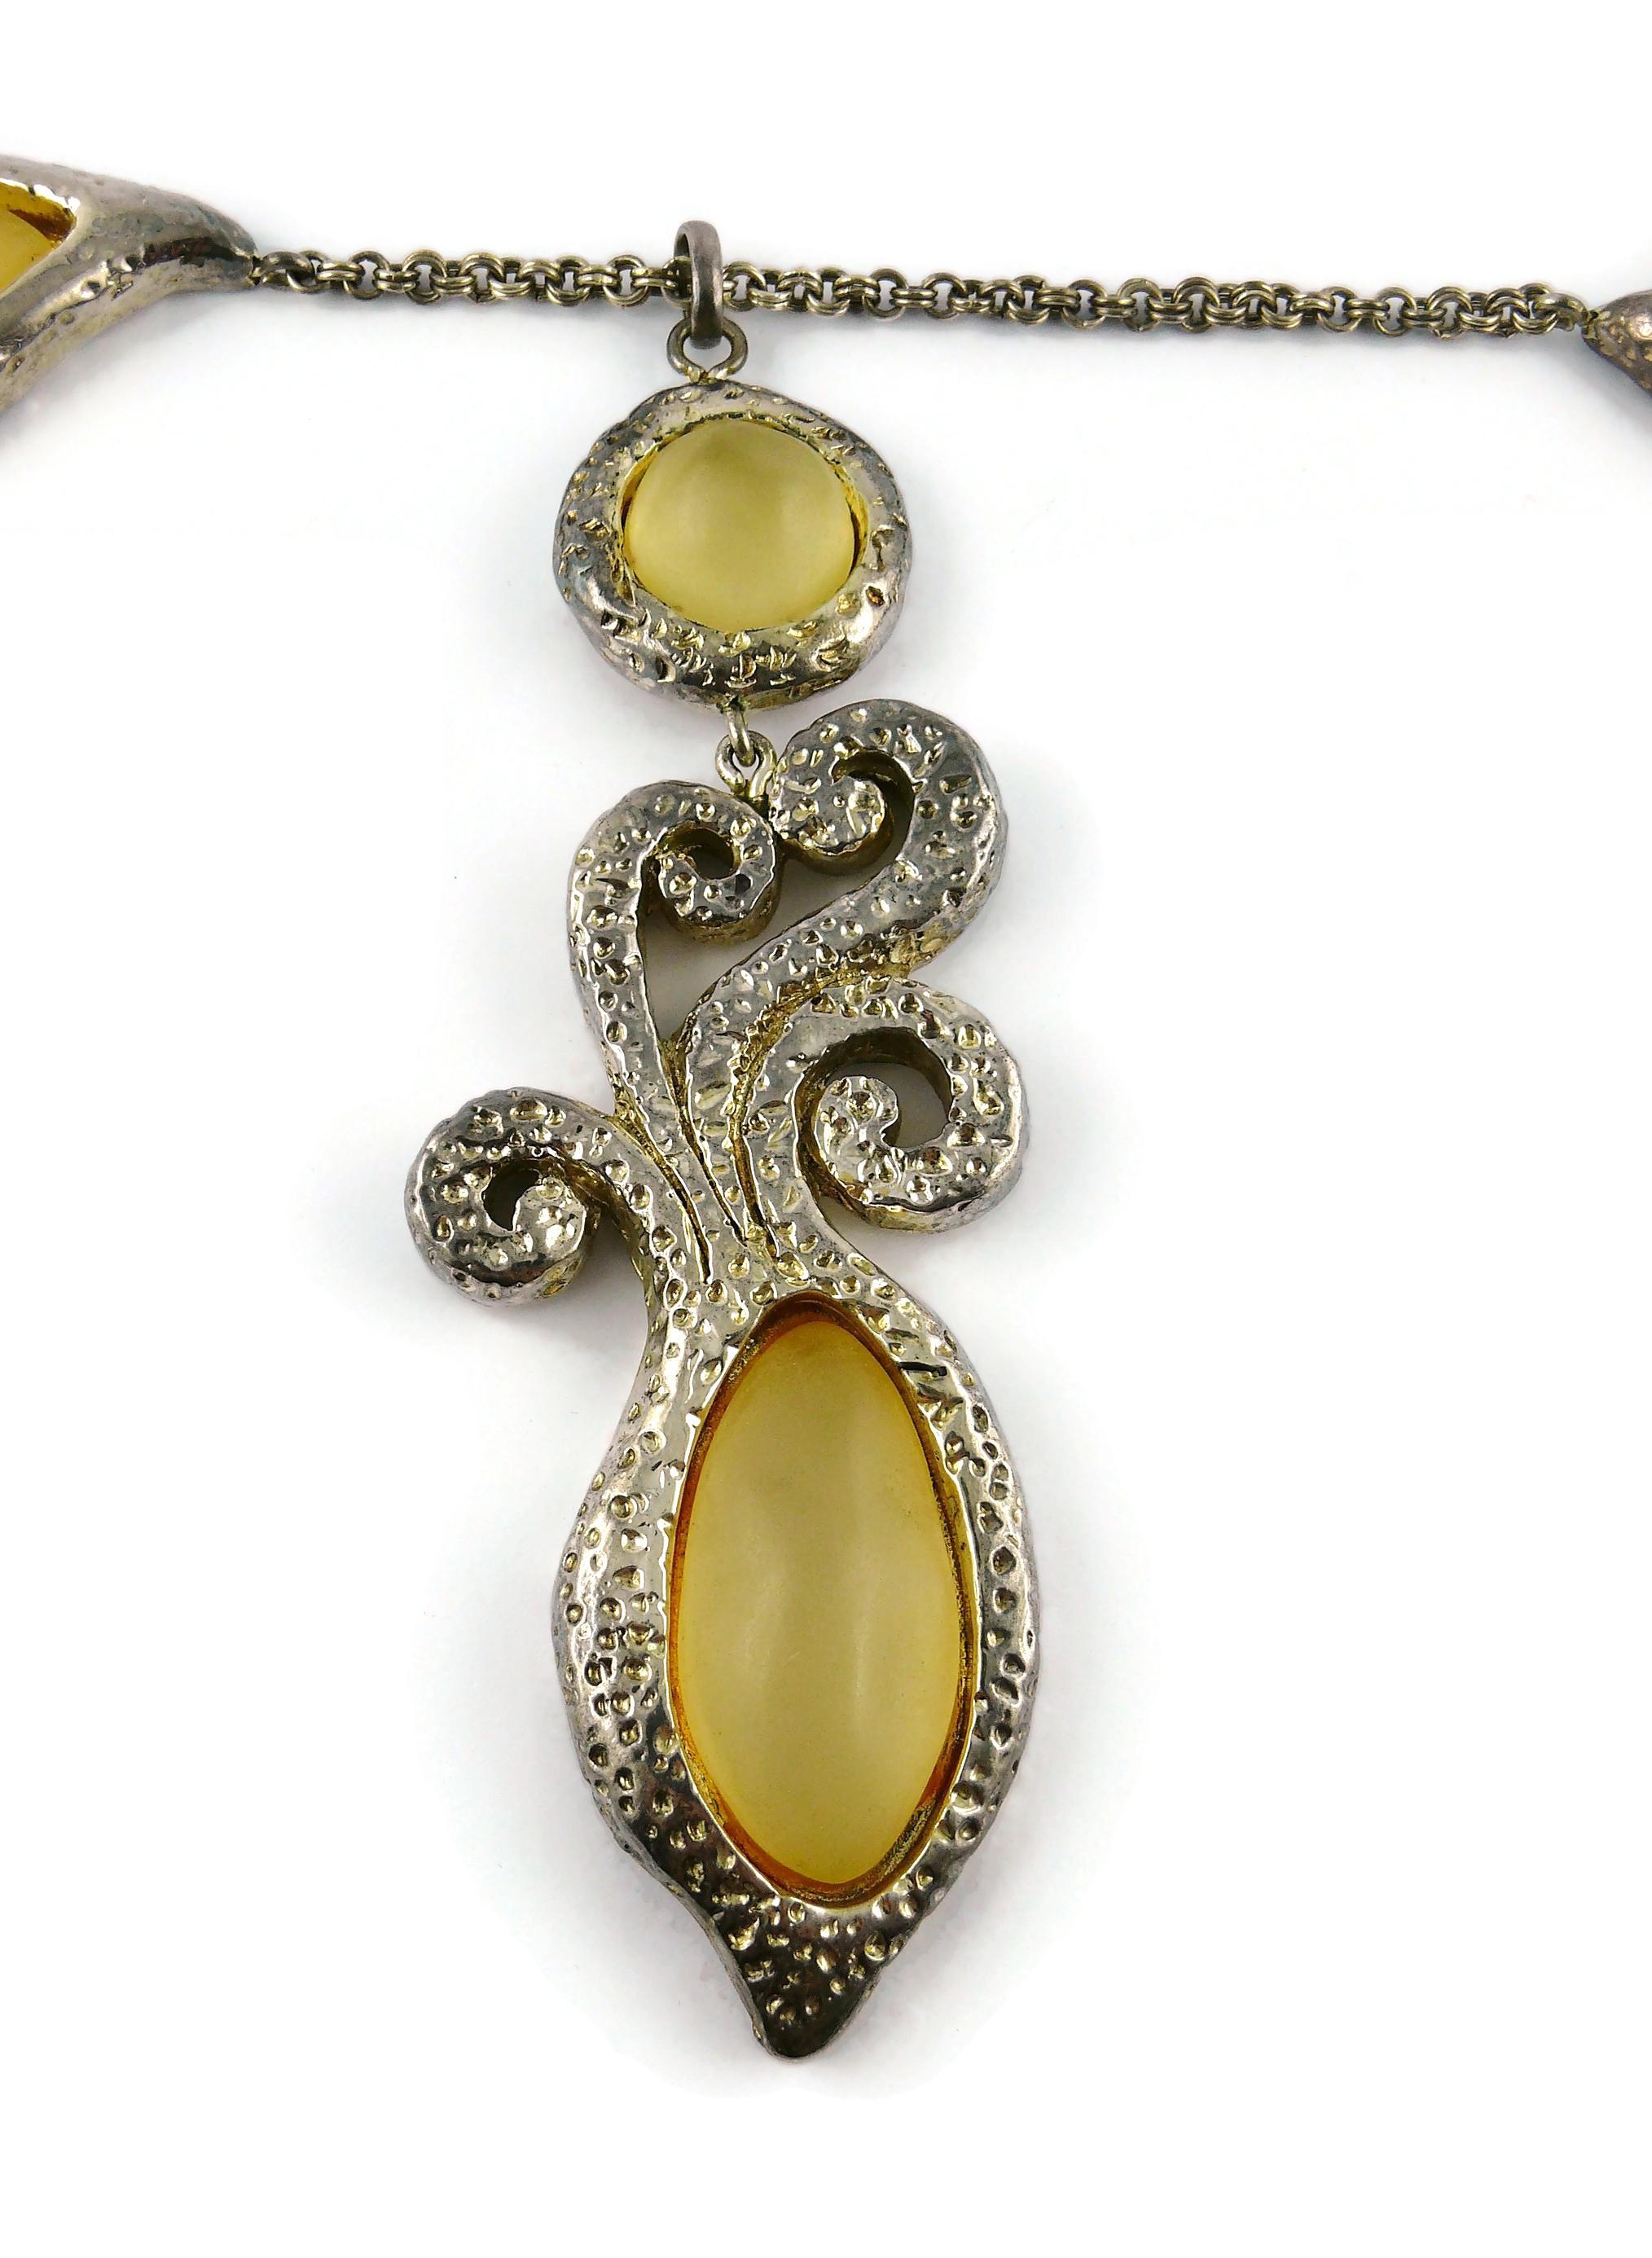 Dominique Denaive Vintage Silver Toned Yellow Resin Necklace and Earrings Set In Fair Condition For Sale In Nice, FR